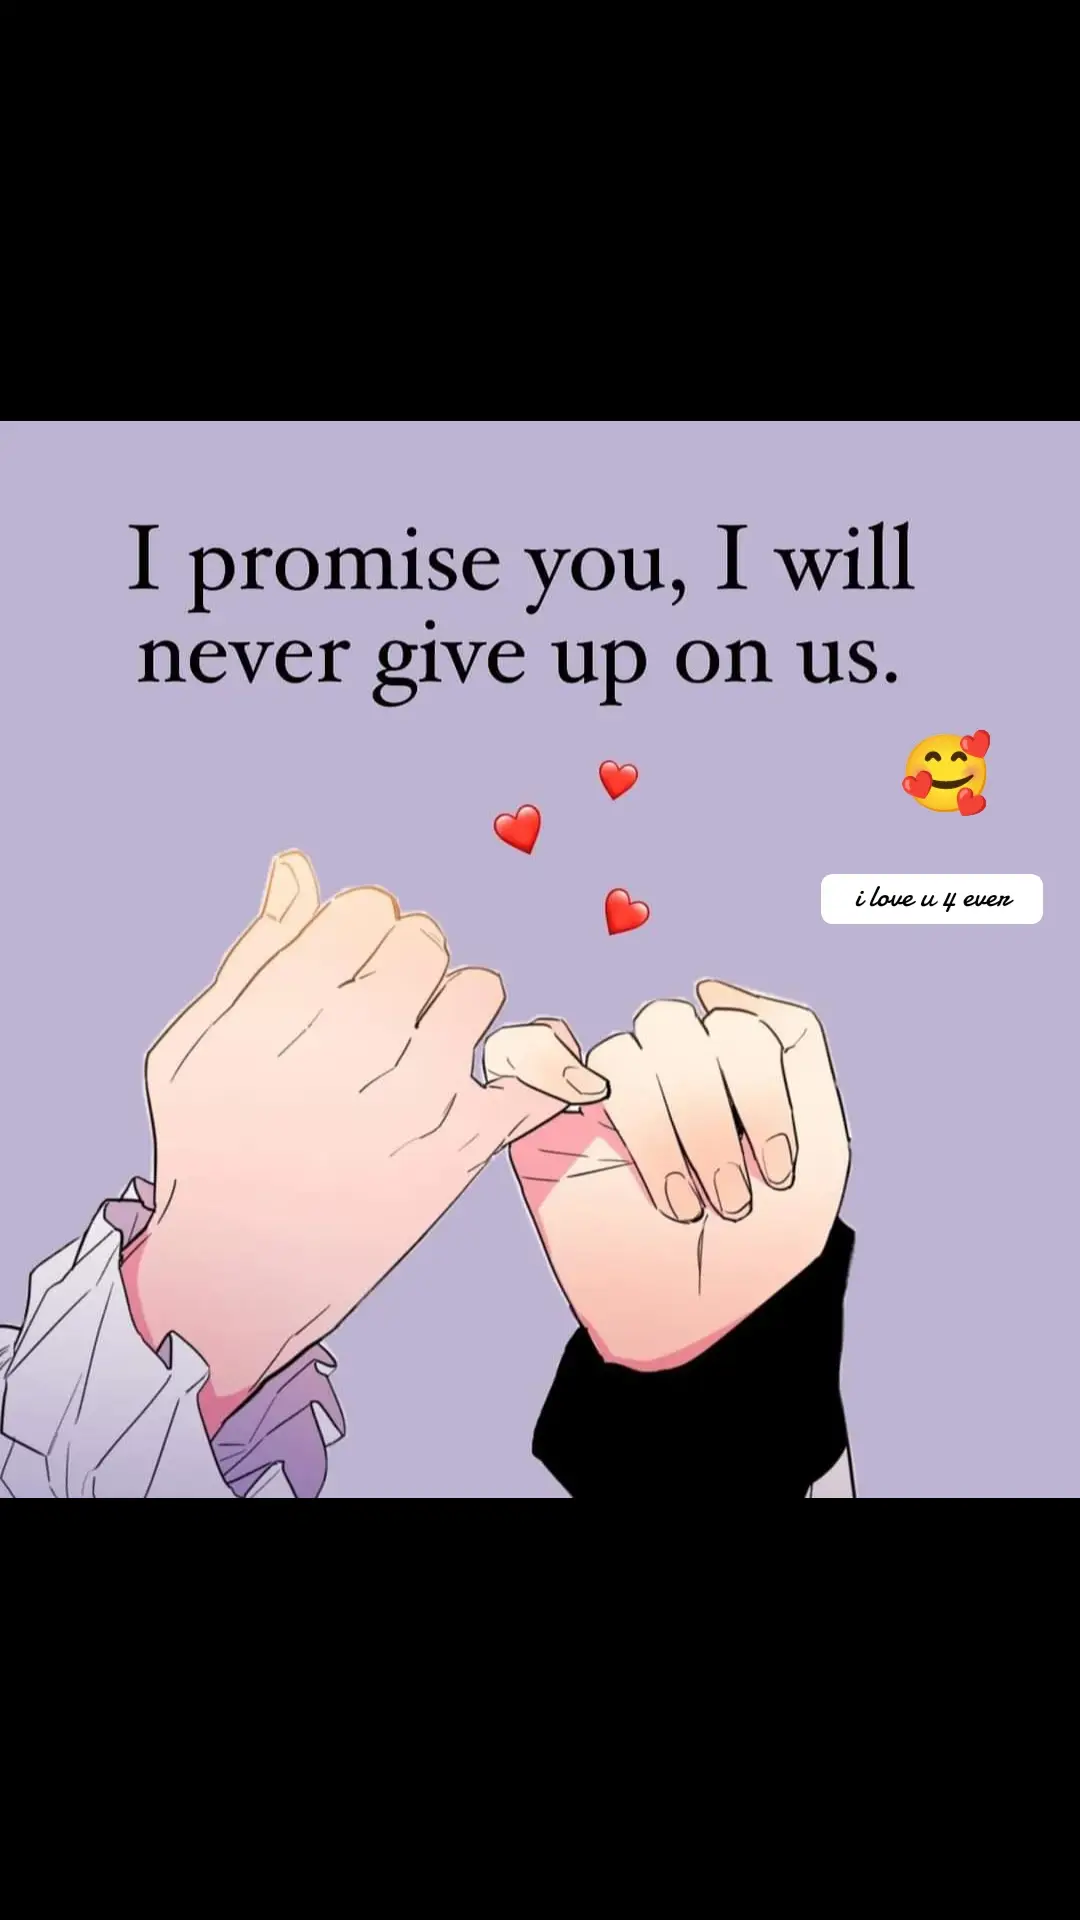 I promise you. I will never give up on us...🥰 #promise  #thisipromiseyou 